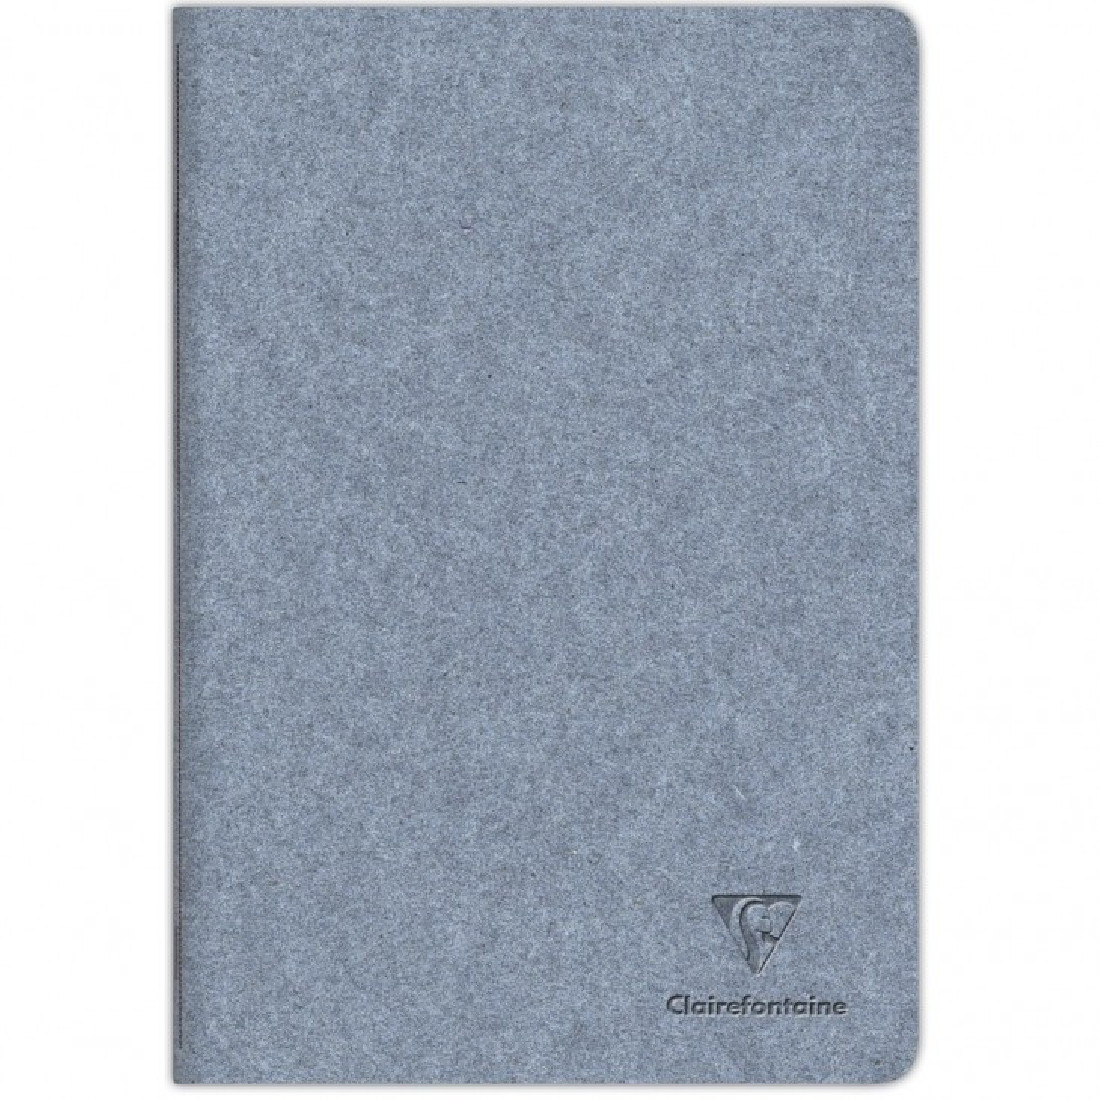 Clairefontaine Rhodia Jeans notebook A4 21x29,7cm, 90gr, lined, 96 pages, 083515